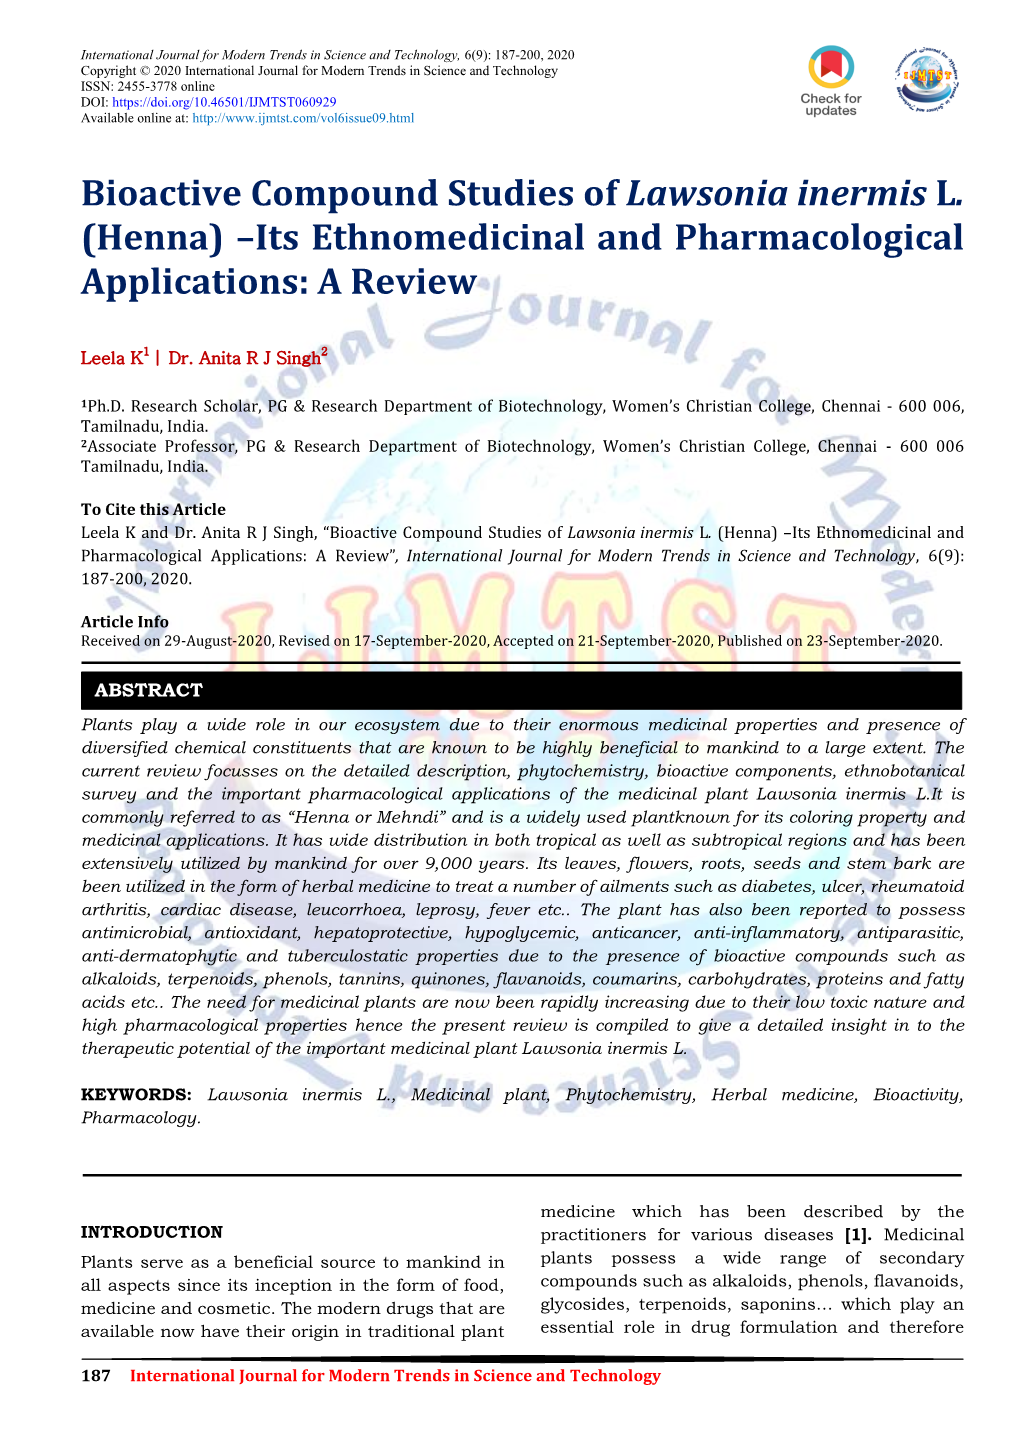 Henna) –Its Ethnomedicinal and Pharmacological Applications: a Review